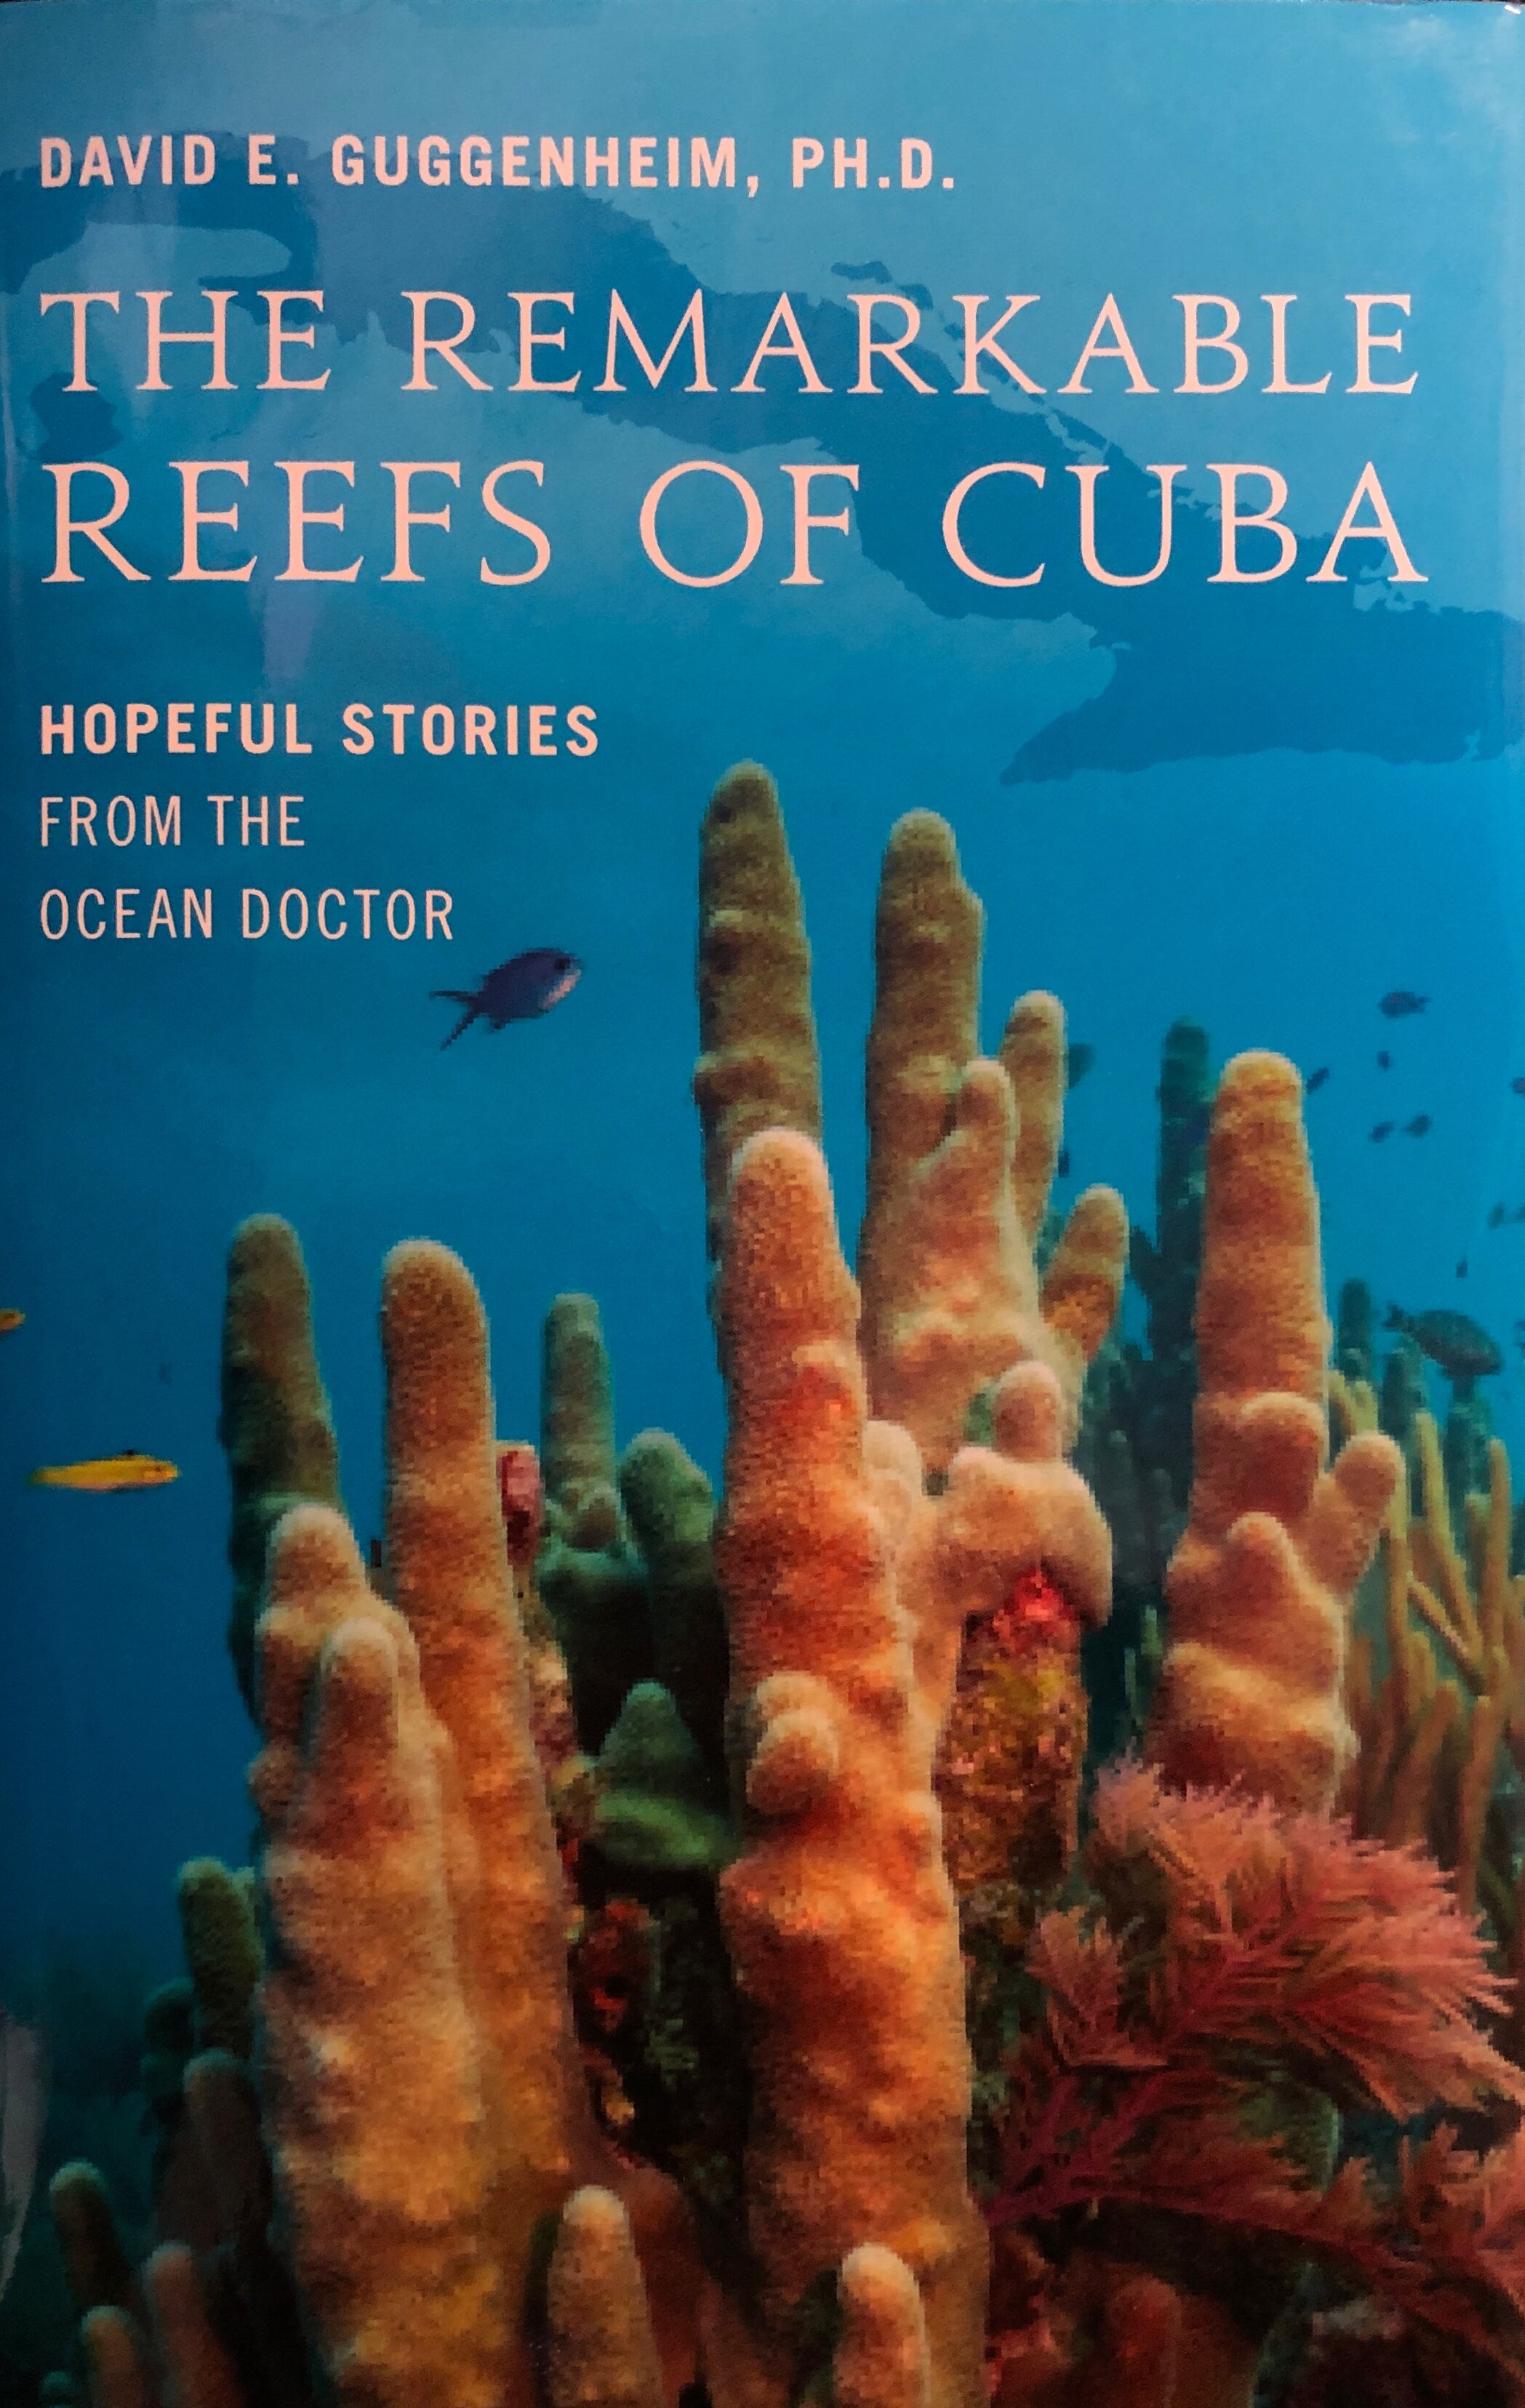 The Remarkable Reefs of Cuba: Hopeful Stories from the Ocean Doctor